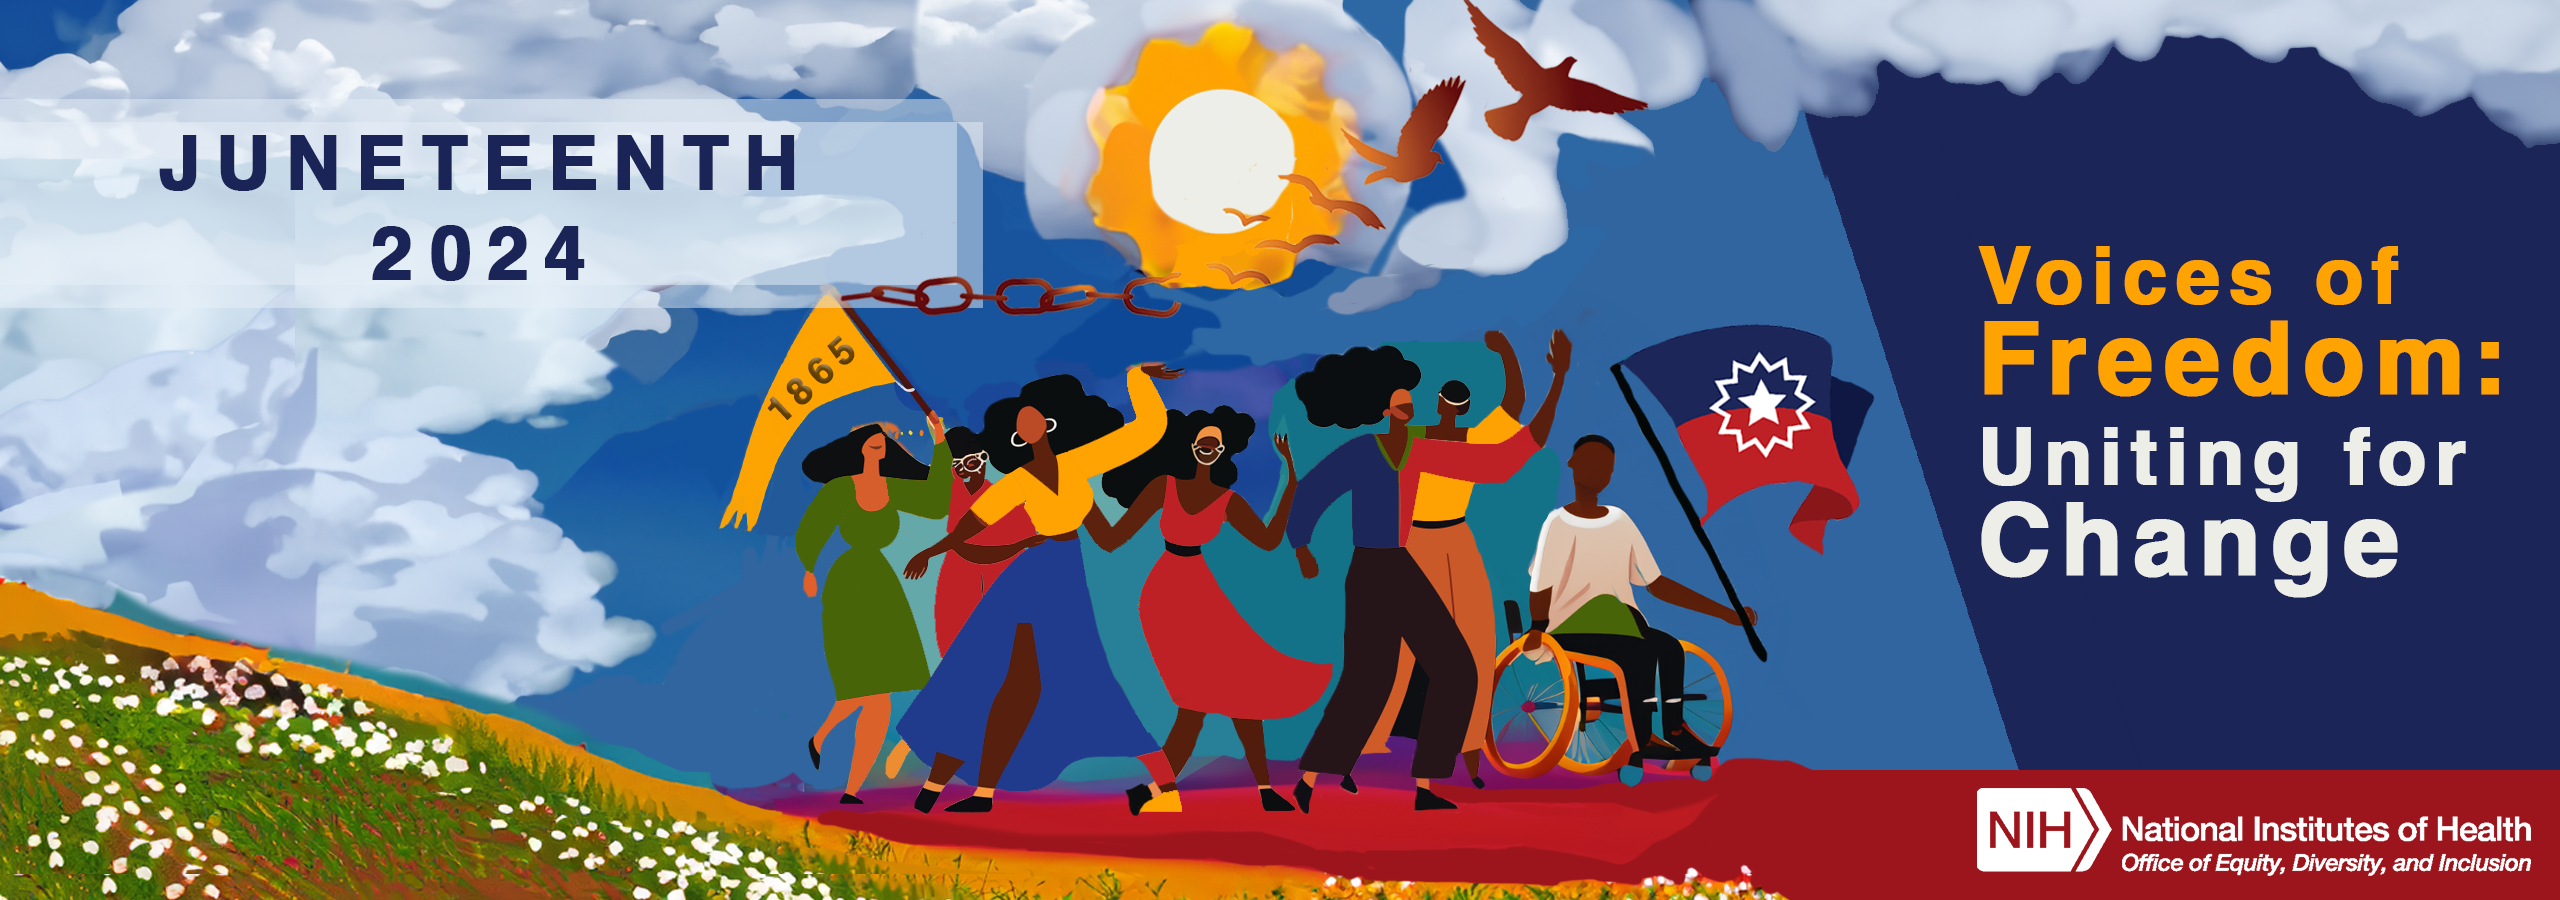 The 2024 Juneteenth artwork features the theme, Voices of Freedom: Uniting for Change, with seven black individuals raising their hands or waving banners underneath the sunlight and a bright sky emerging from a cloudy background. One banner features the date 1865. Attached to the banner is a chain that breaks into birds flying away to freedom.